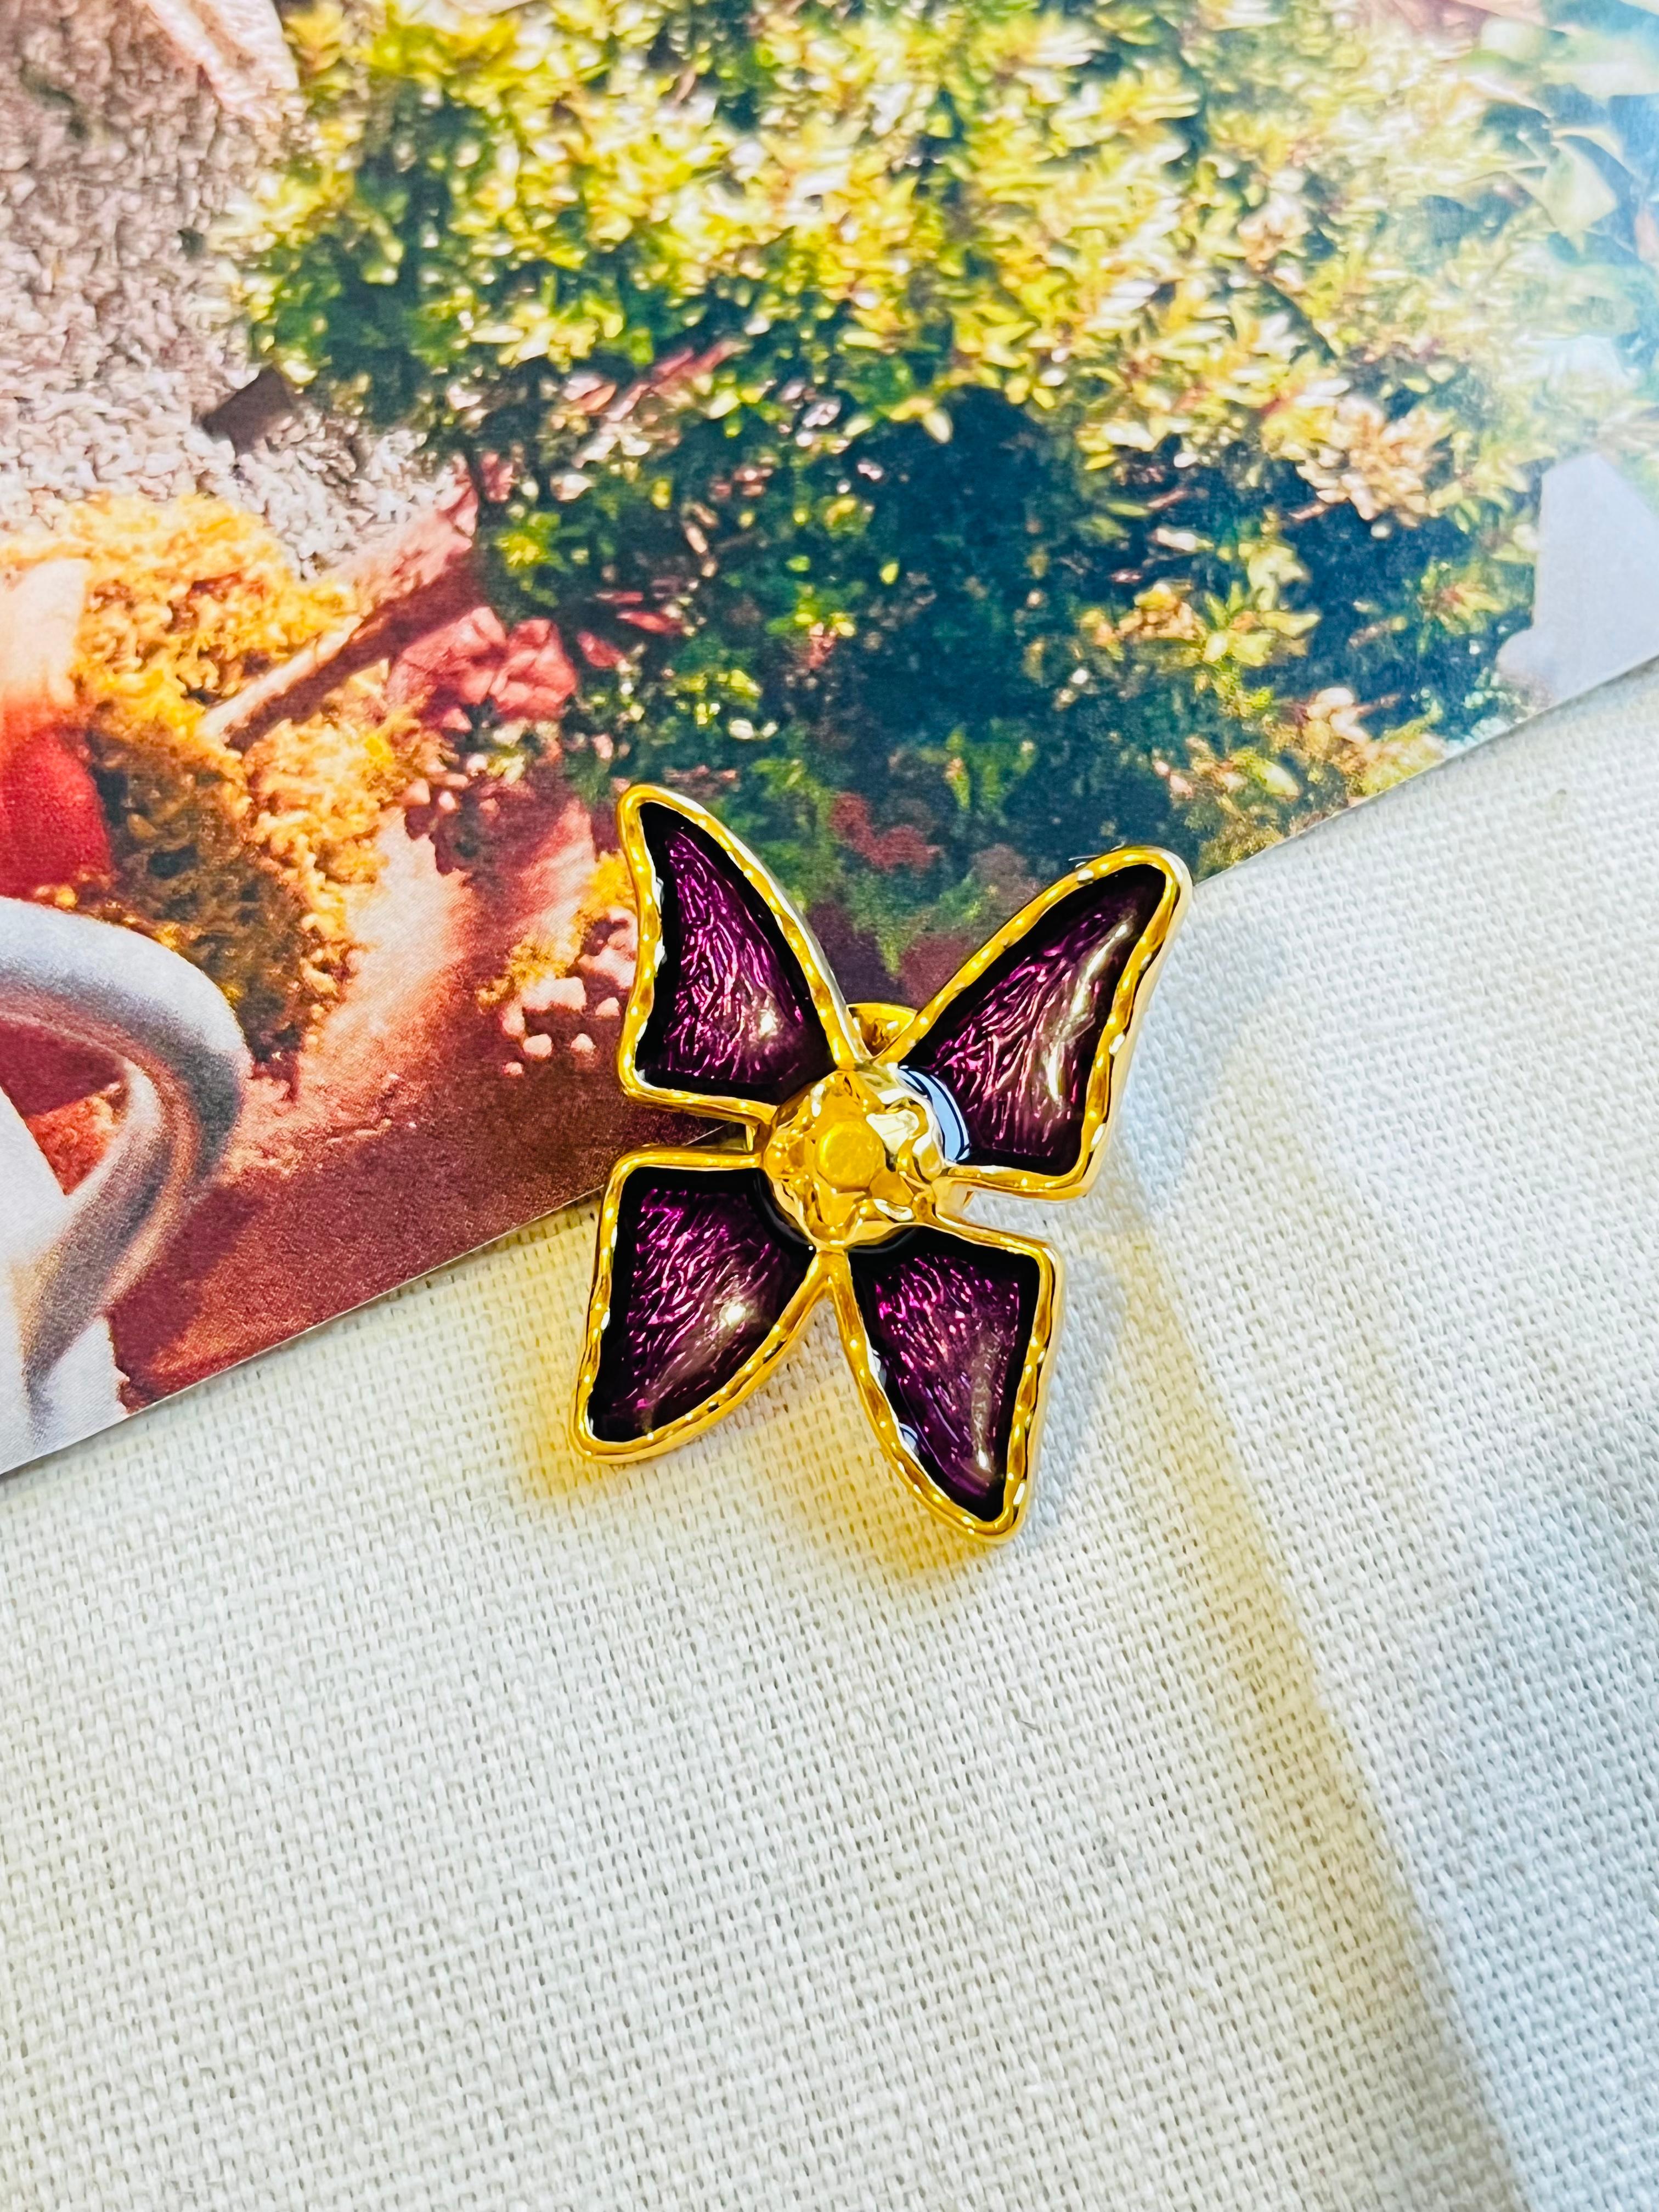 Yves Saint Laurent YSL Vintage 1980 Vivid Butterfly Glow Purple Gold Brooch Pin In Excellent Condition For Sale In Wokingham, England